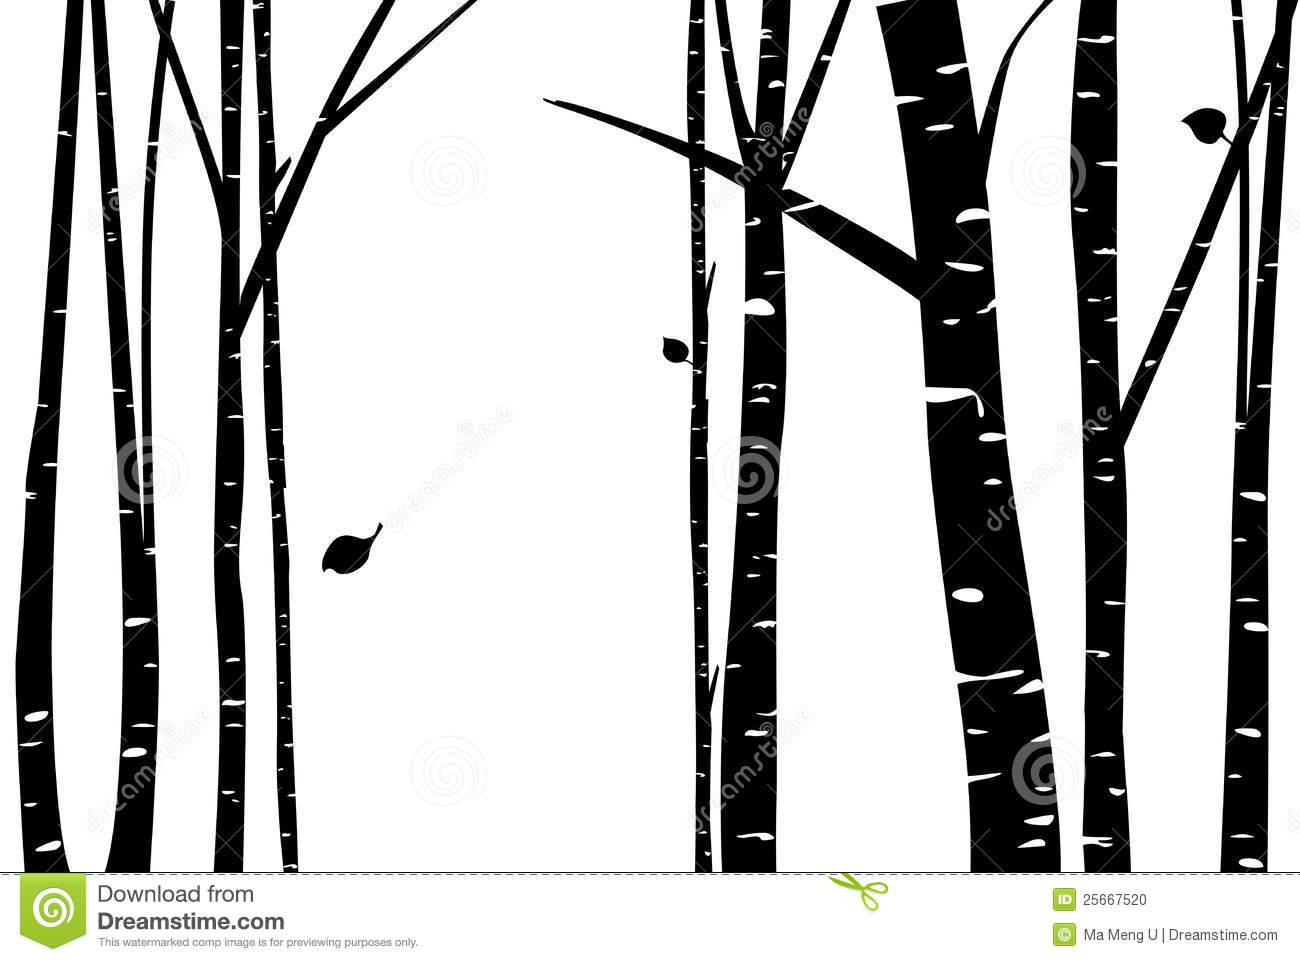 Silhouette of a Birch Tree with Leaves